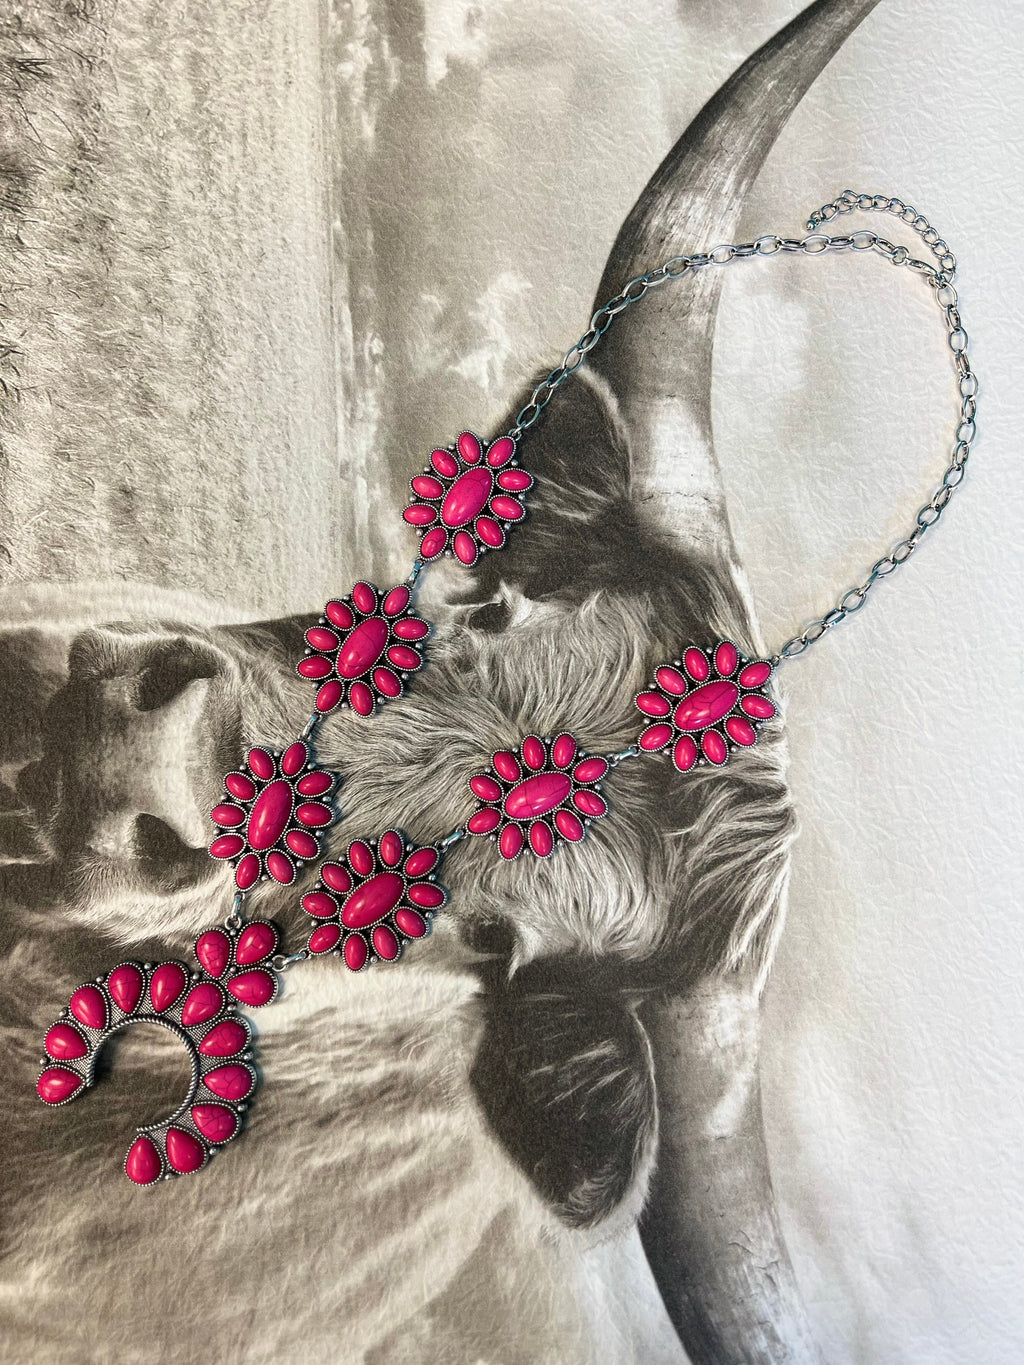 This Cowgirl Barbie Squash Necklace is sure to stand out! This stylish silver necklace features an adjustable lobster clasp, western concho style, and a playful pink stone that's sure to make a statement! So why not rope your style and lasso one today? Yeehaw!  27" chain with a 3" adjustable lobster clasp